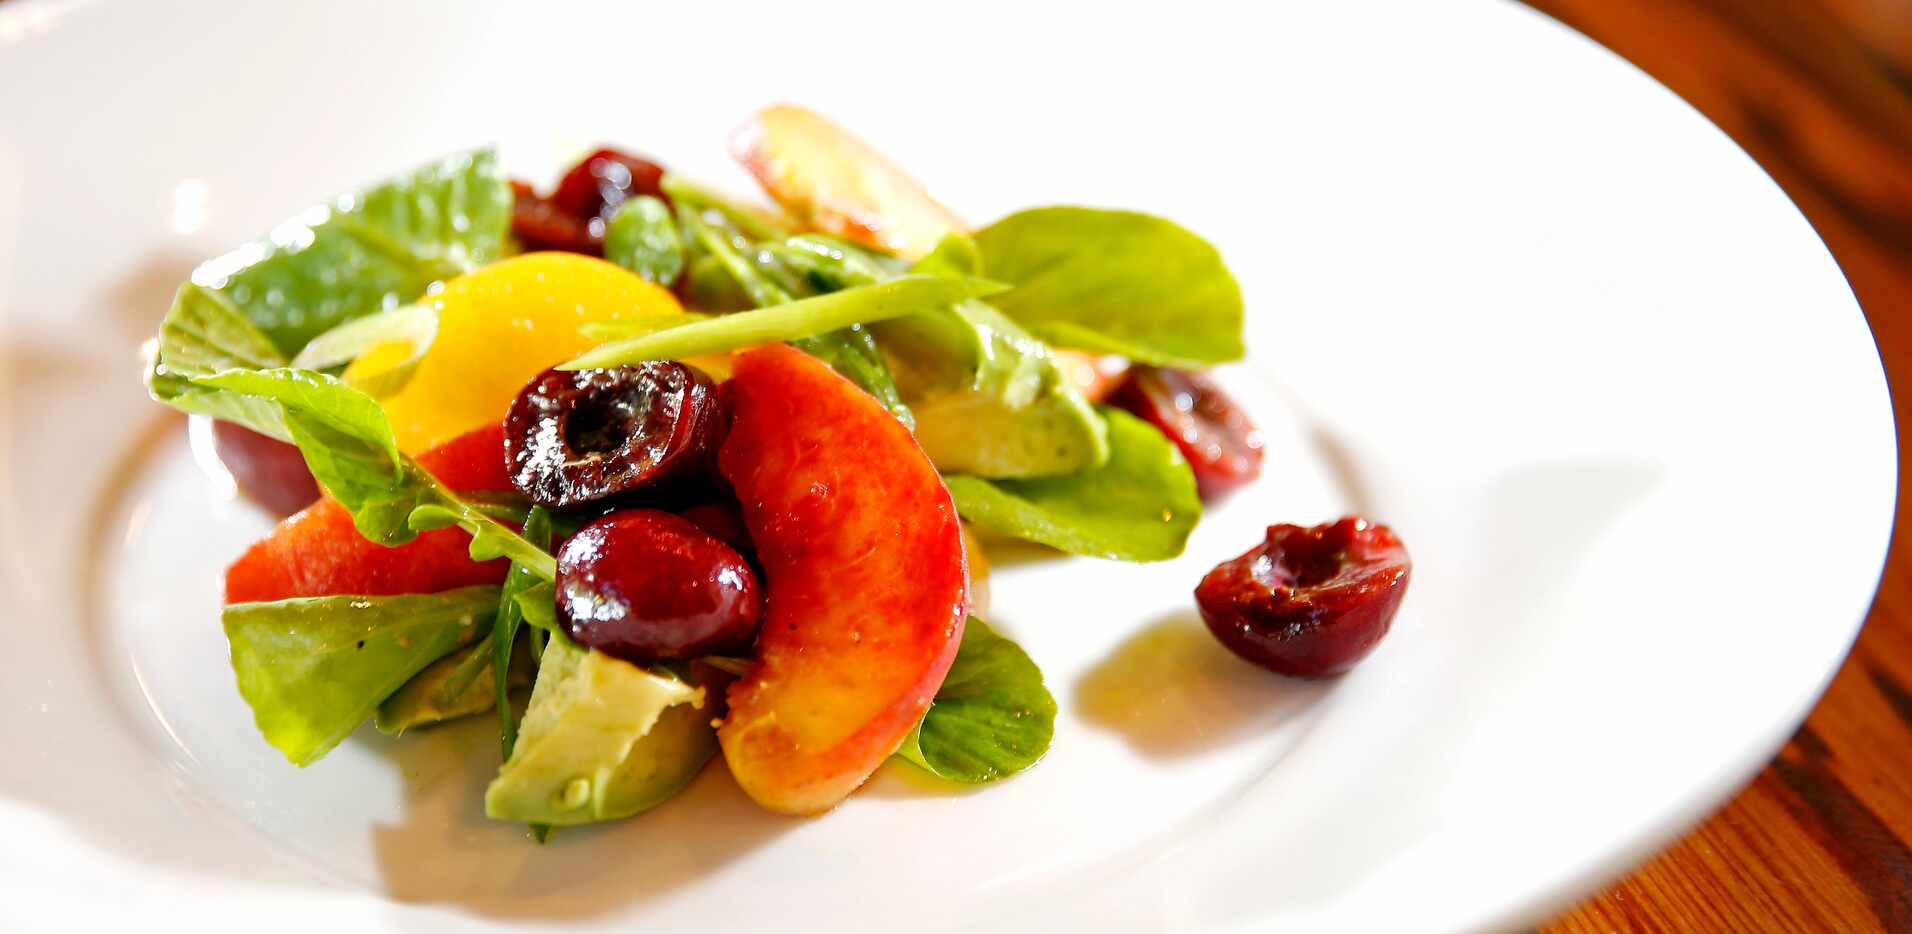 Avocado and Stone Fruit Salad at LARK on the Park restaurant.